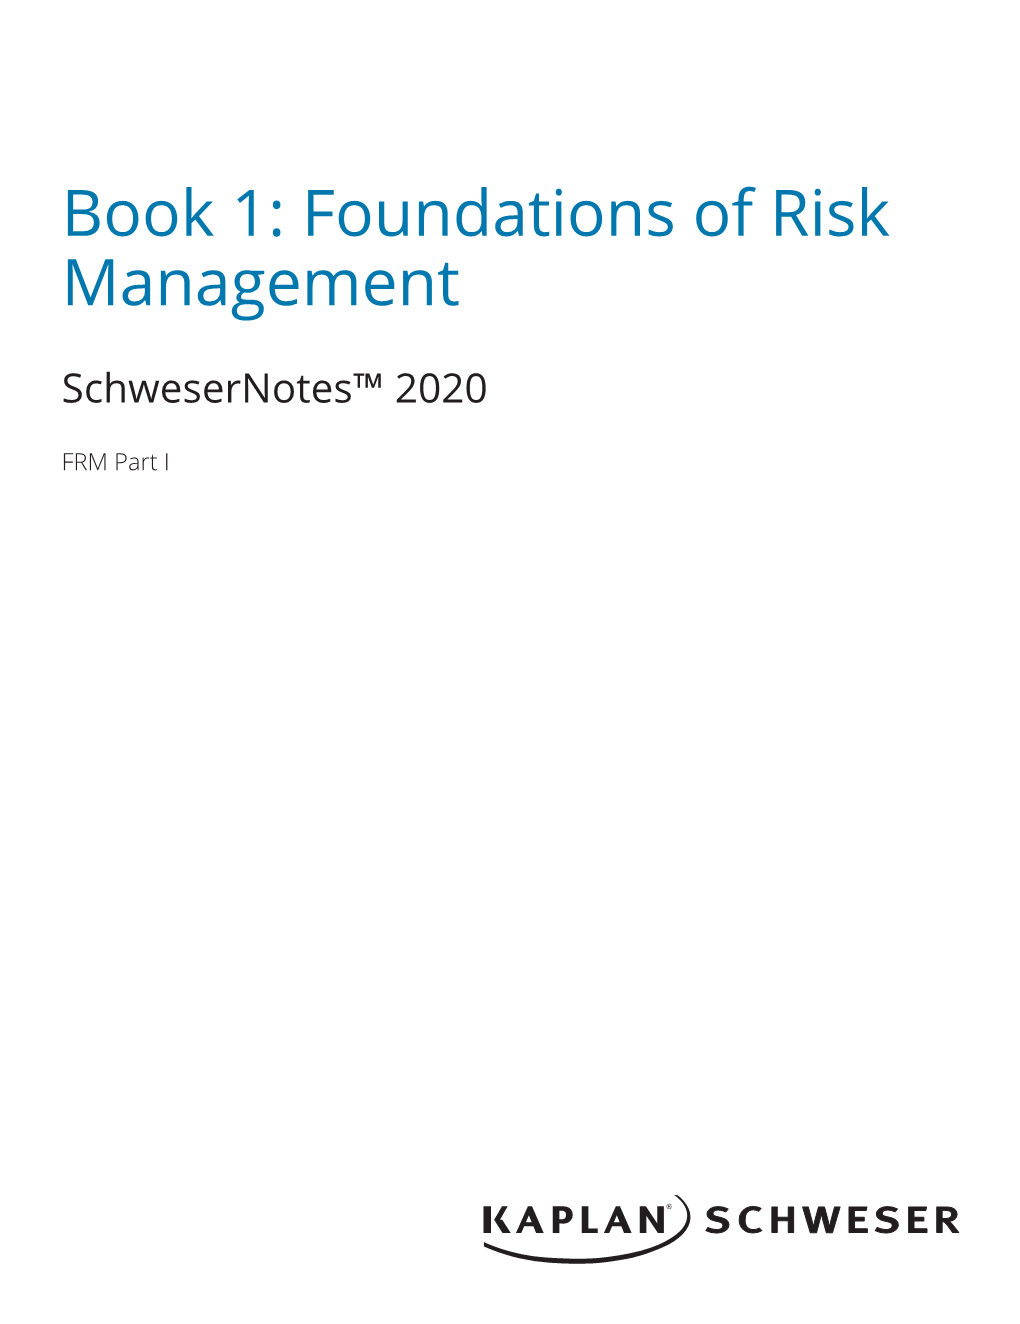 Book 1: Foundations of Risk Management